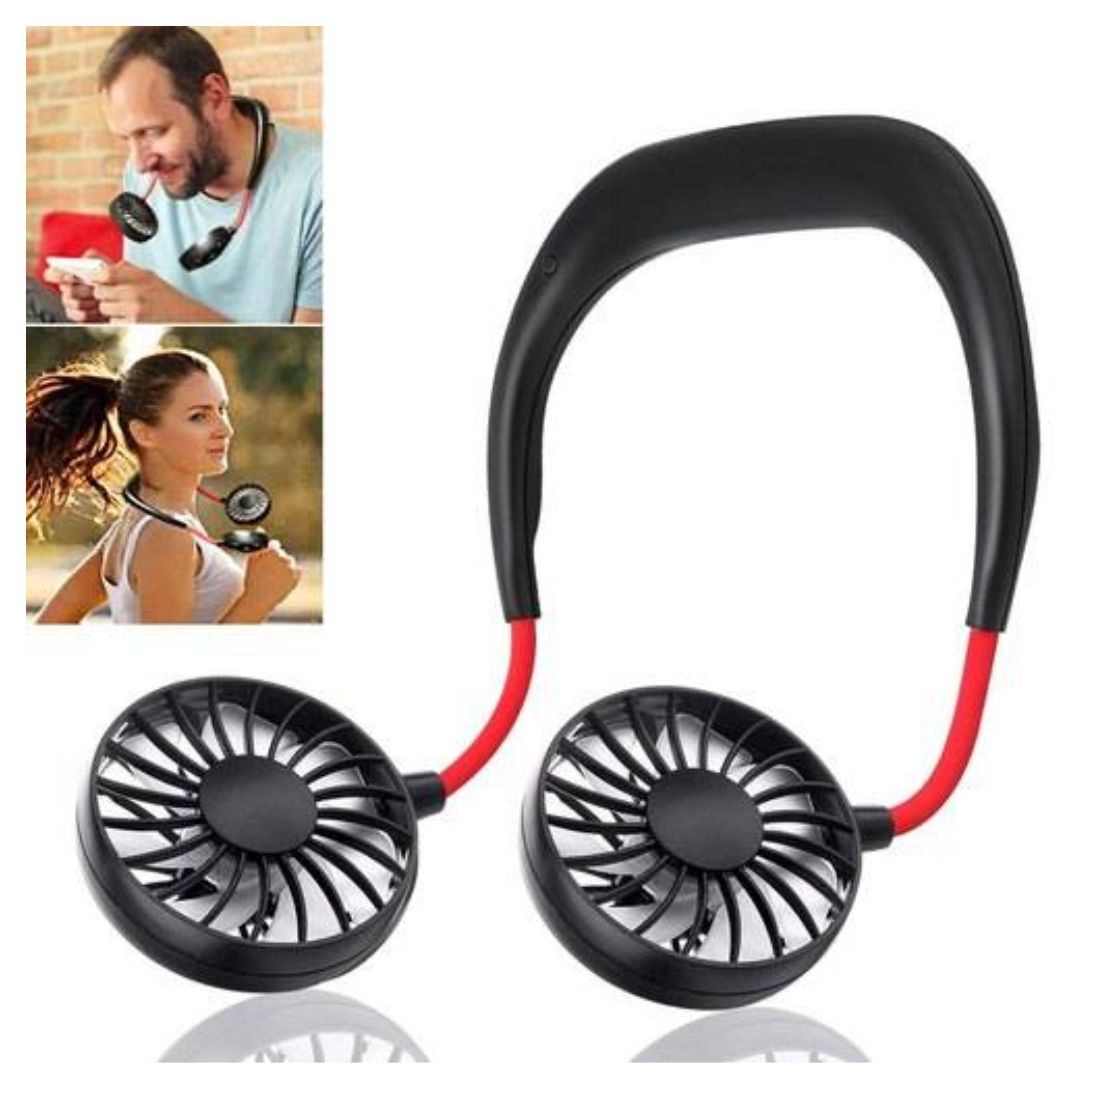 360-Degree Rotation Rechargeable Neckband Fan: Hands-Free Portable Cooling Solution